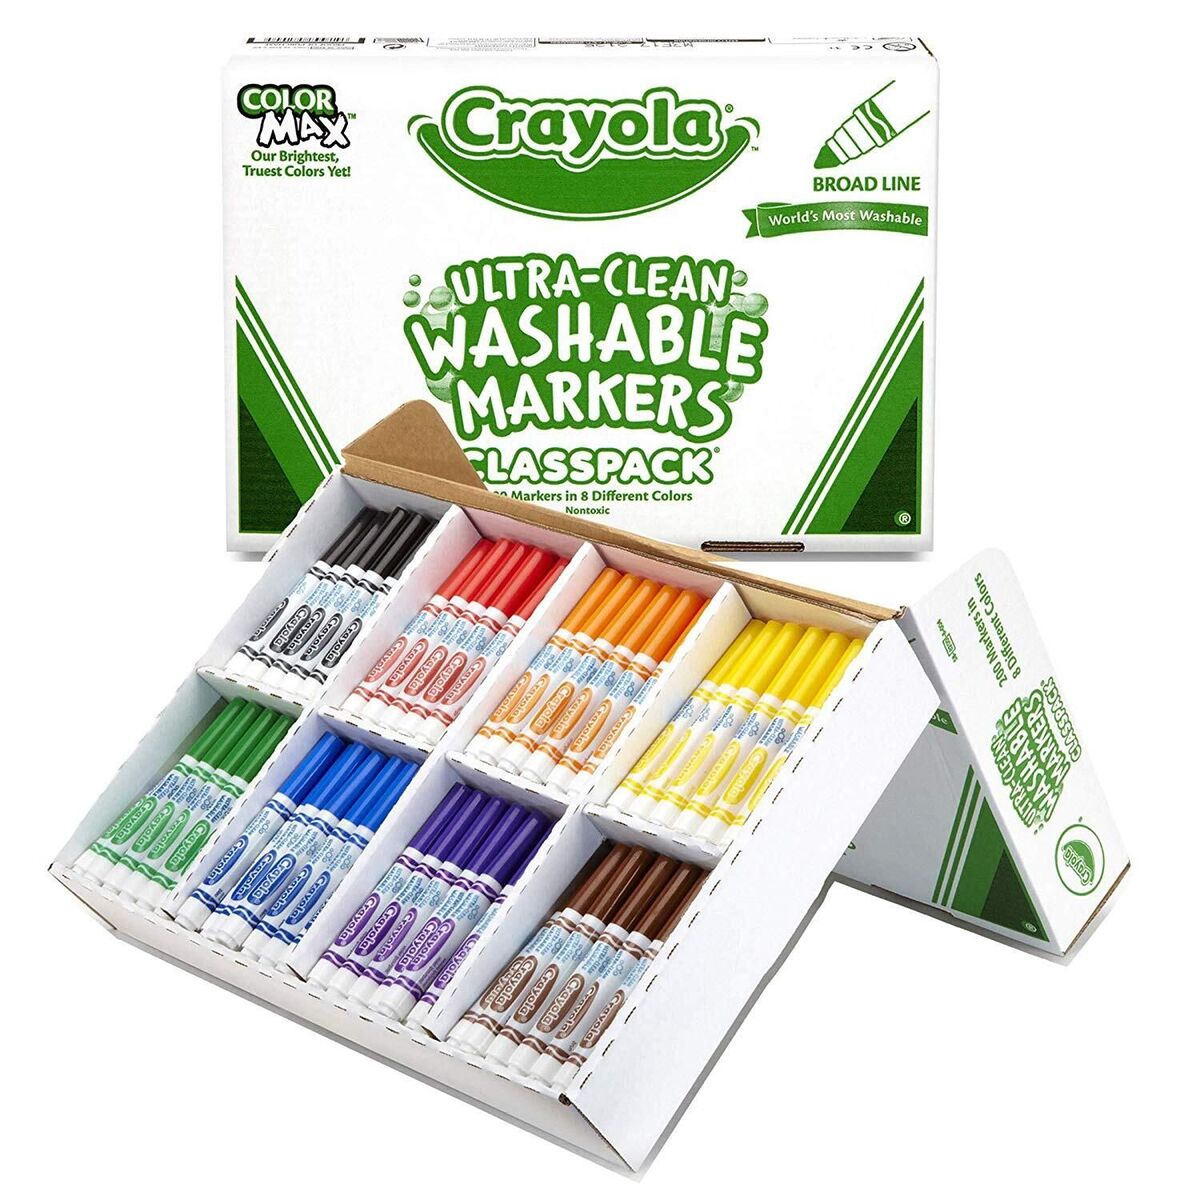 CRAYOLA WASHABLE BROAD MARKER 200 Assorted Classic ClasspackMarkers